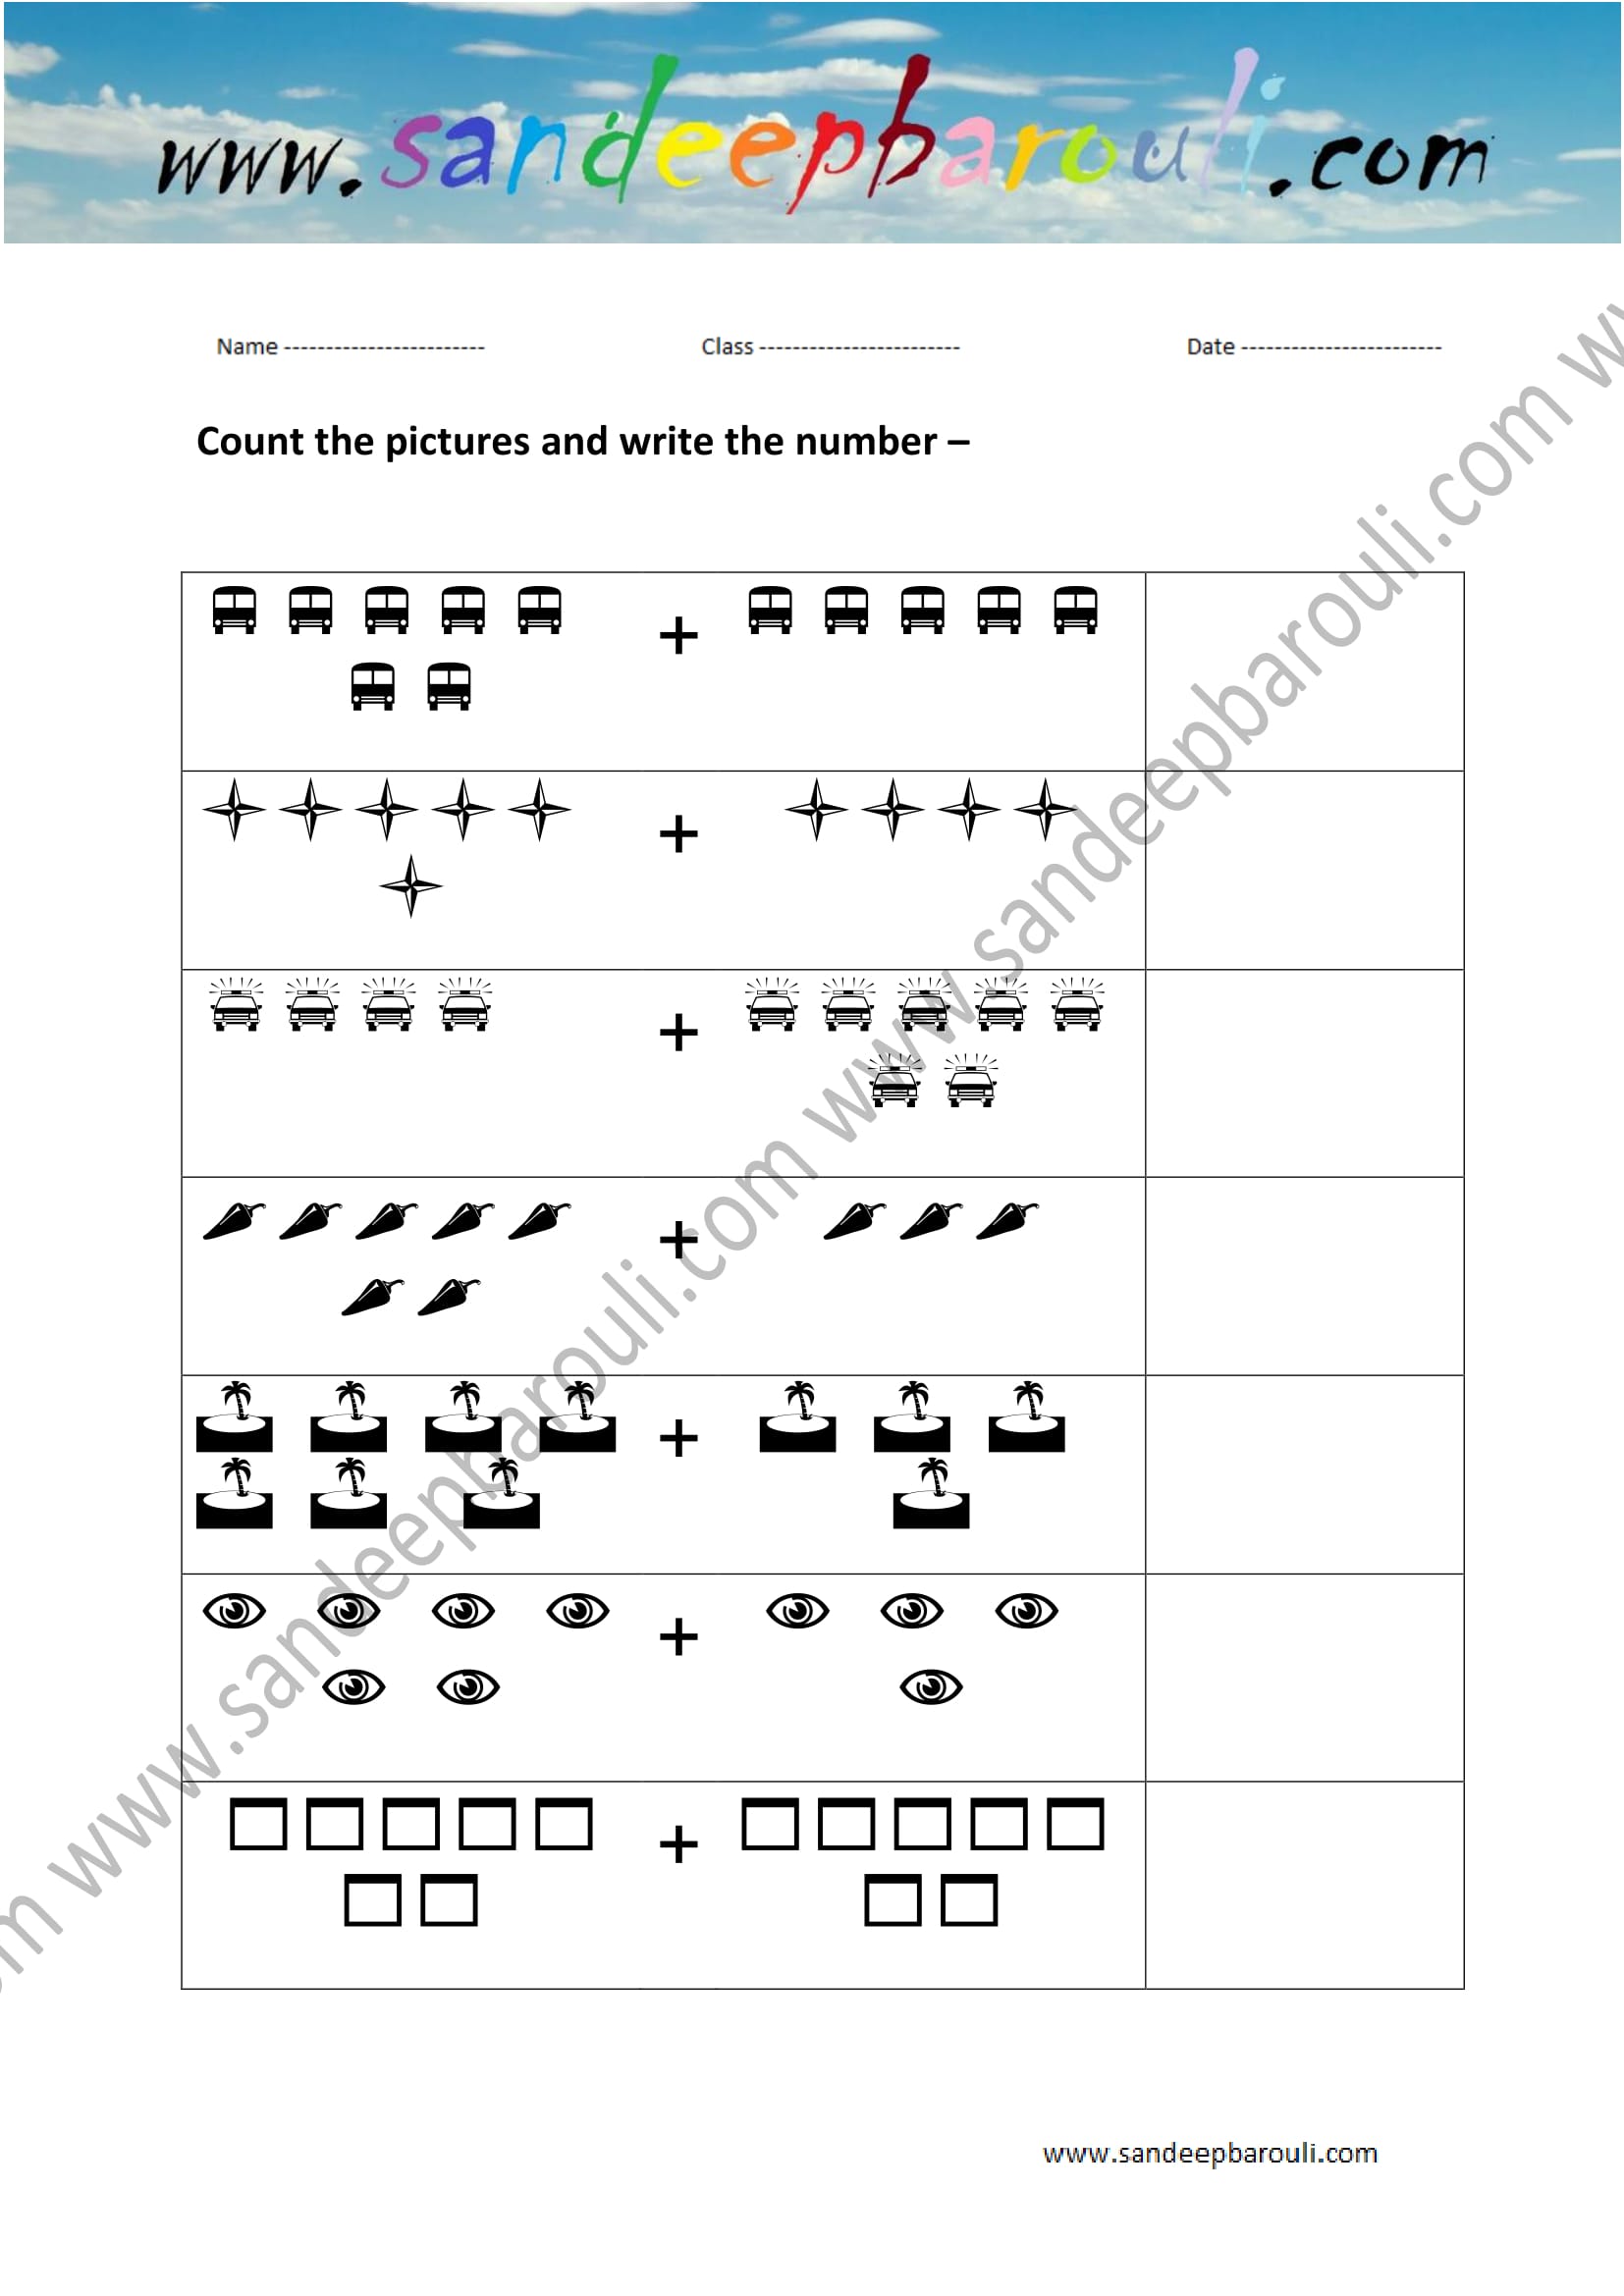 Count the Picture and Write the Number Worksheet (8)